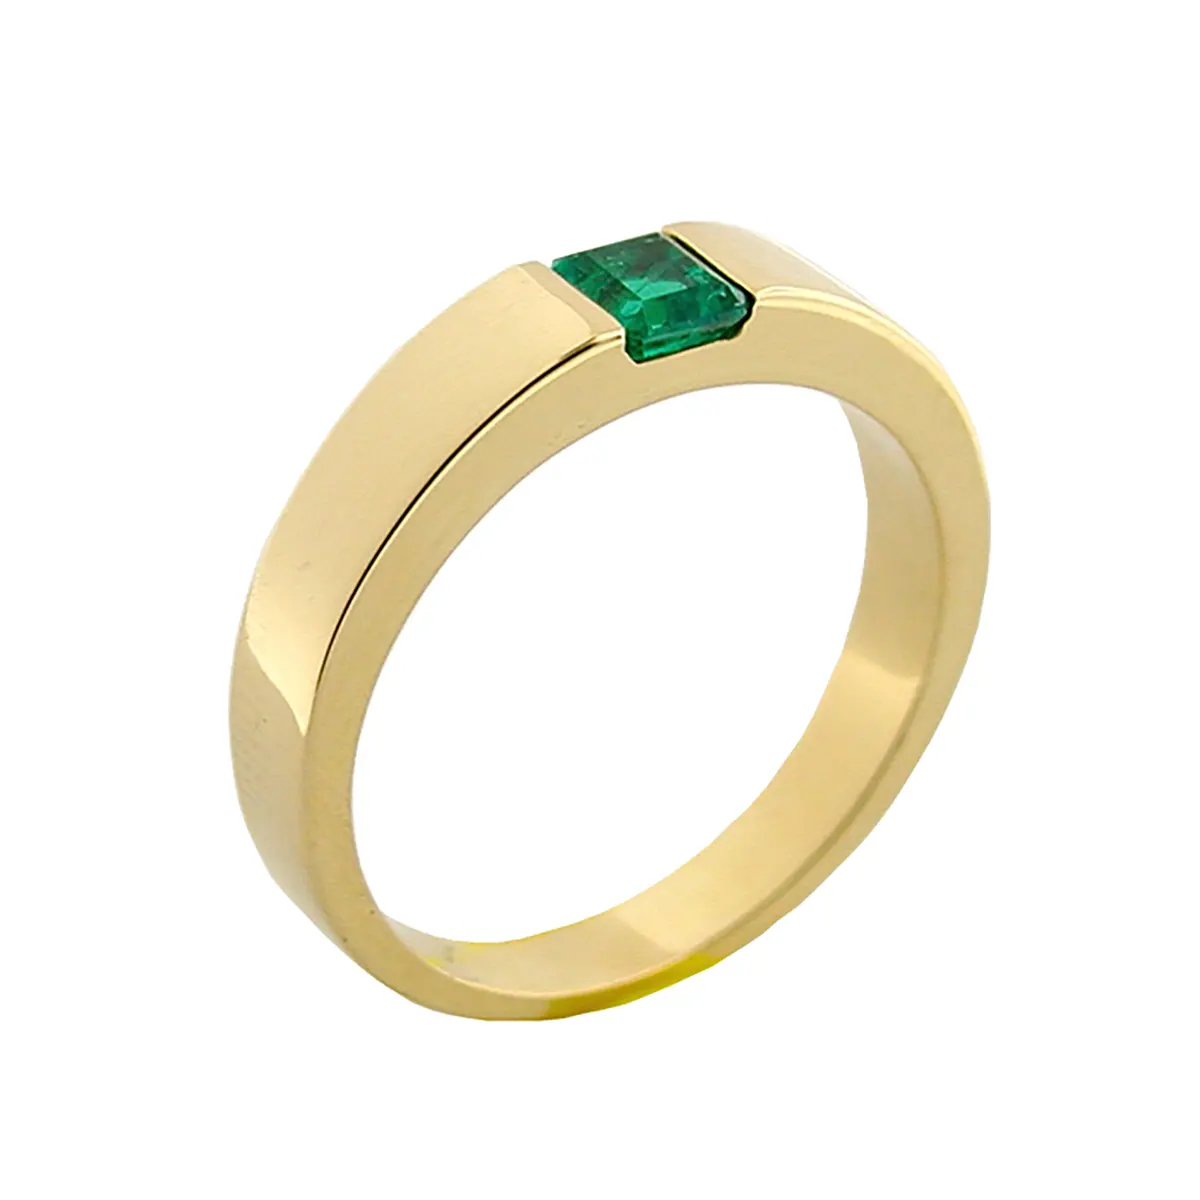 0.75 Carat Round Cut Real Emerald Men's 4 Prong Solitaire Band Ring 14